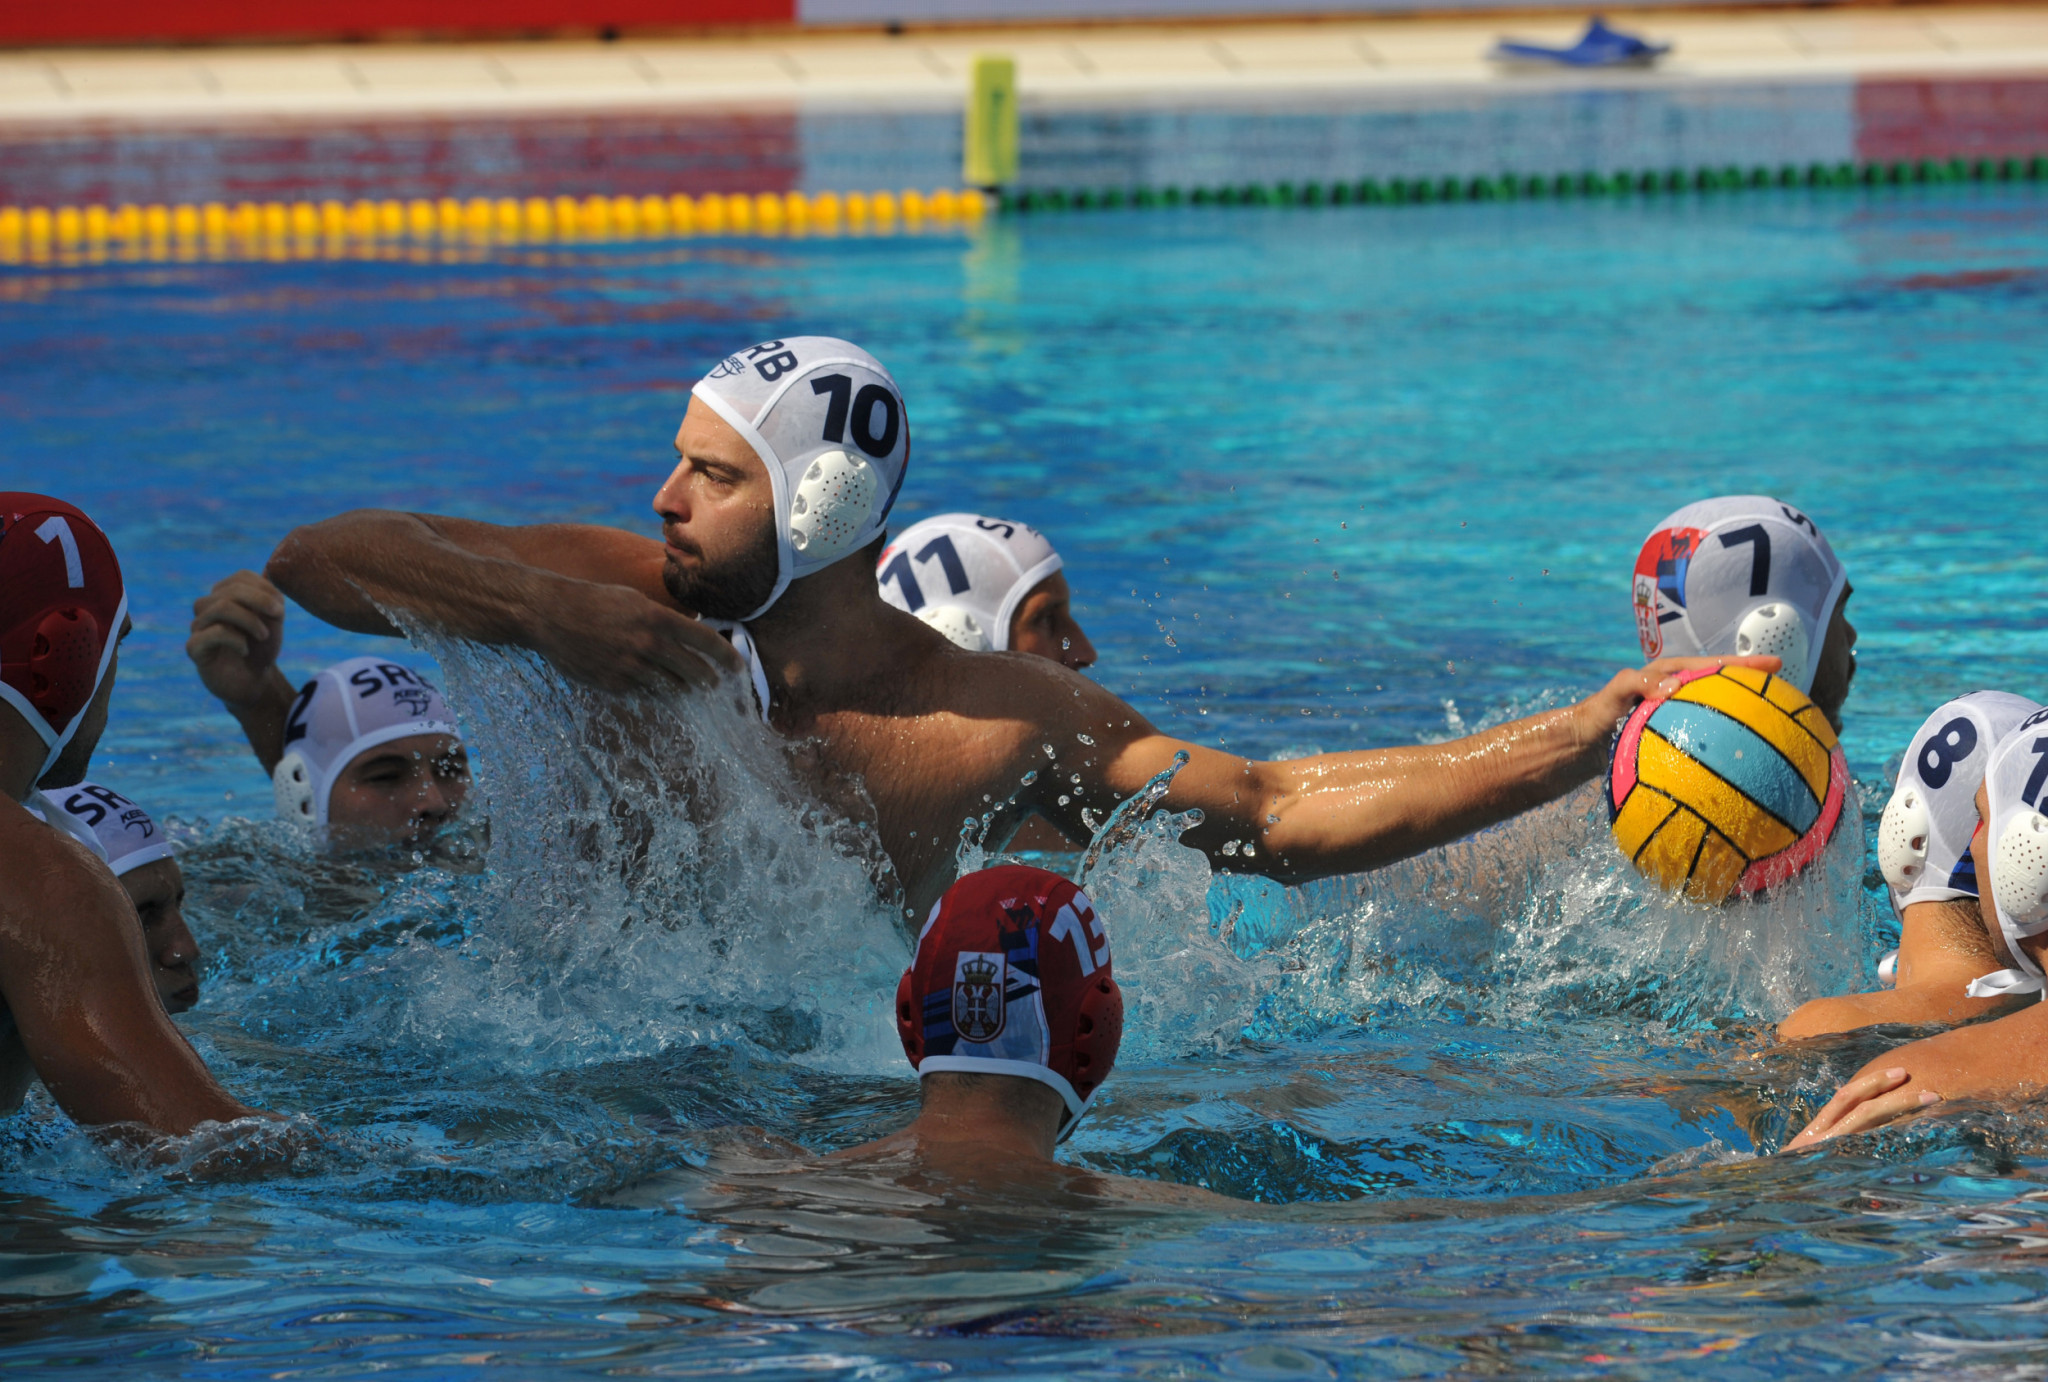 Serbia beat Spain on a penalty shoot-out to earn a fifth European Water Polo title in Barcelona ©LEN